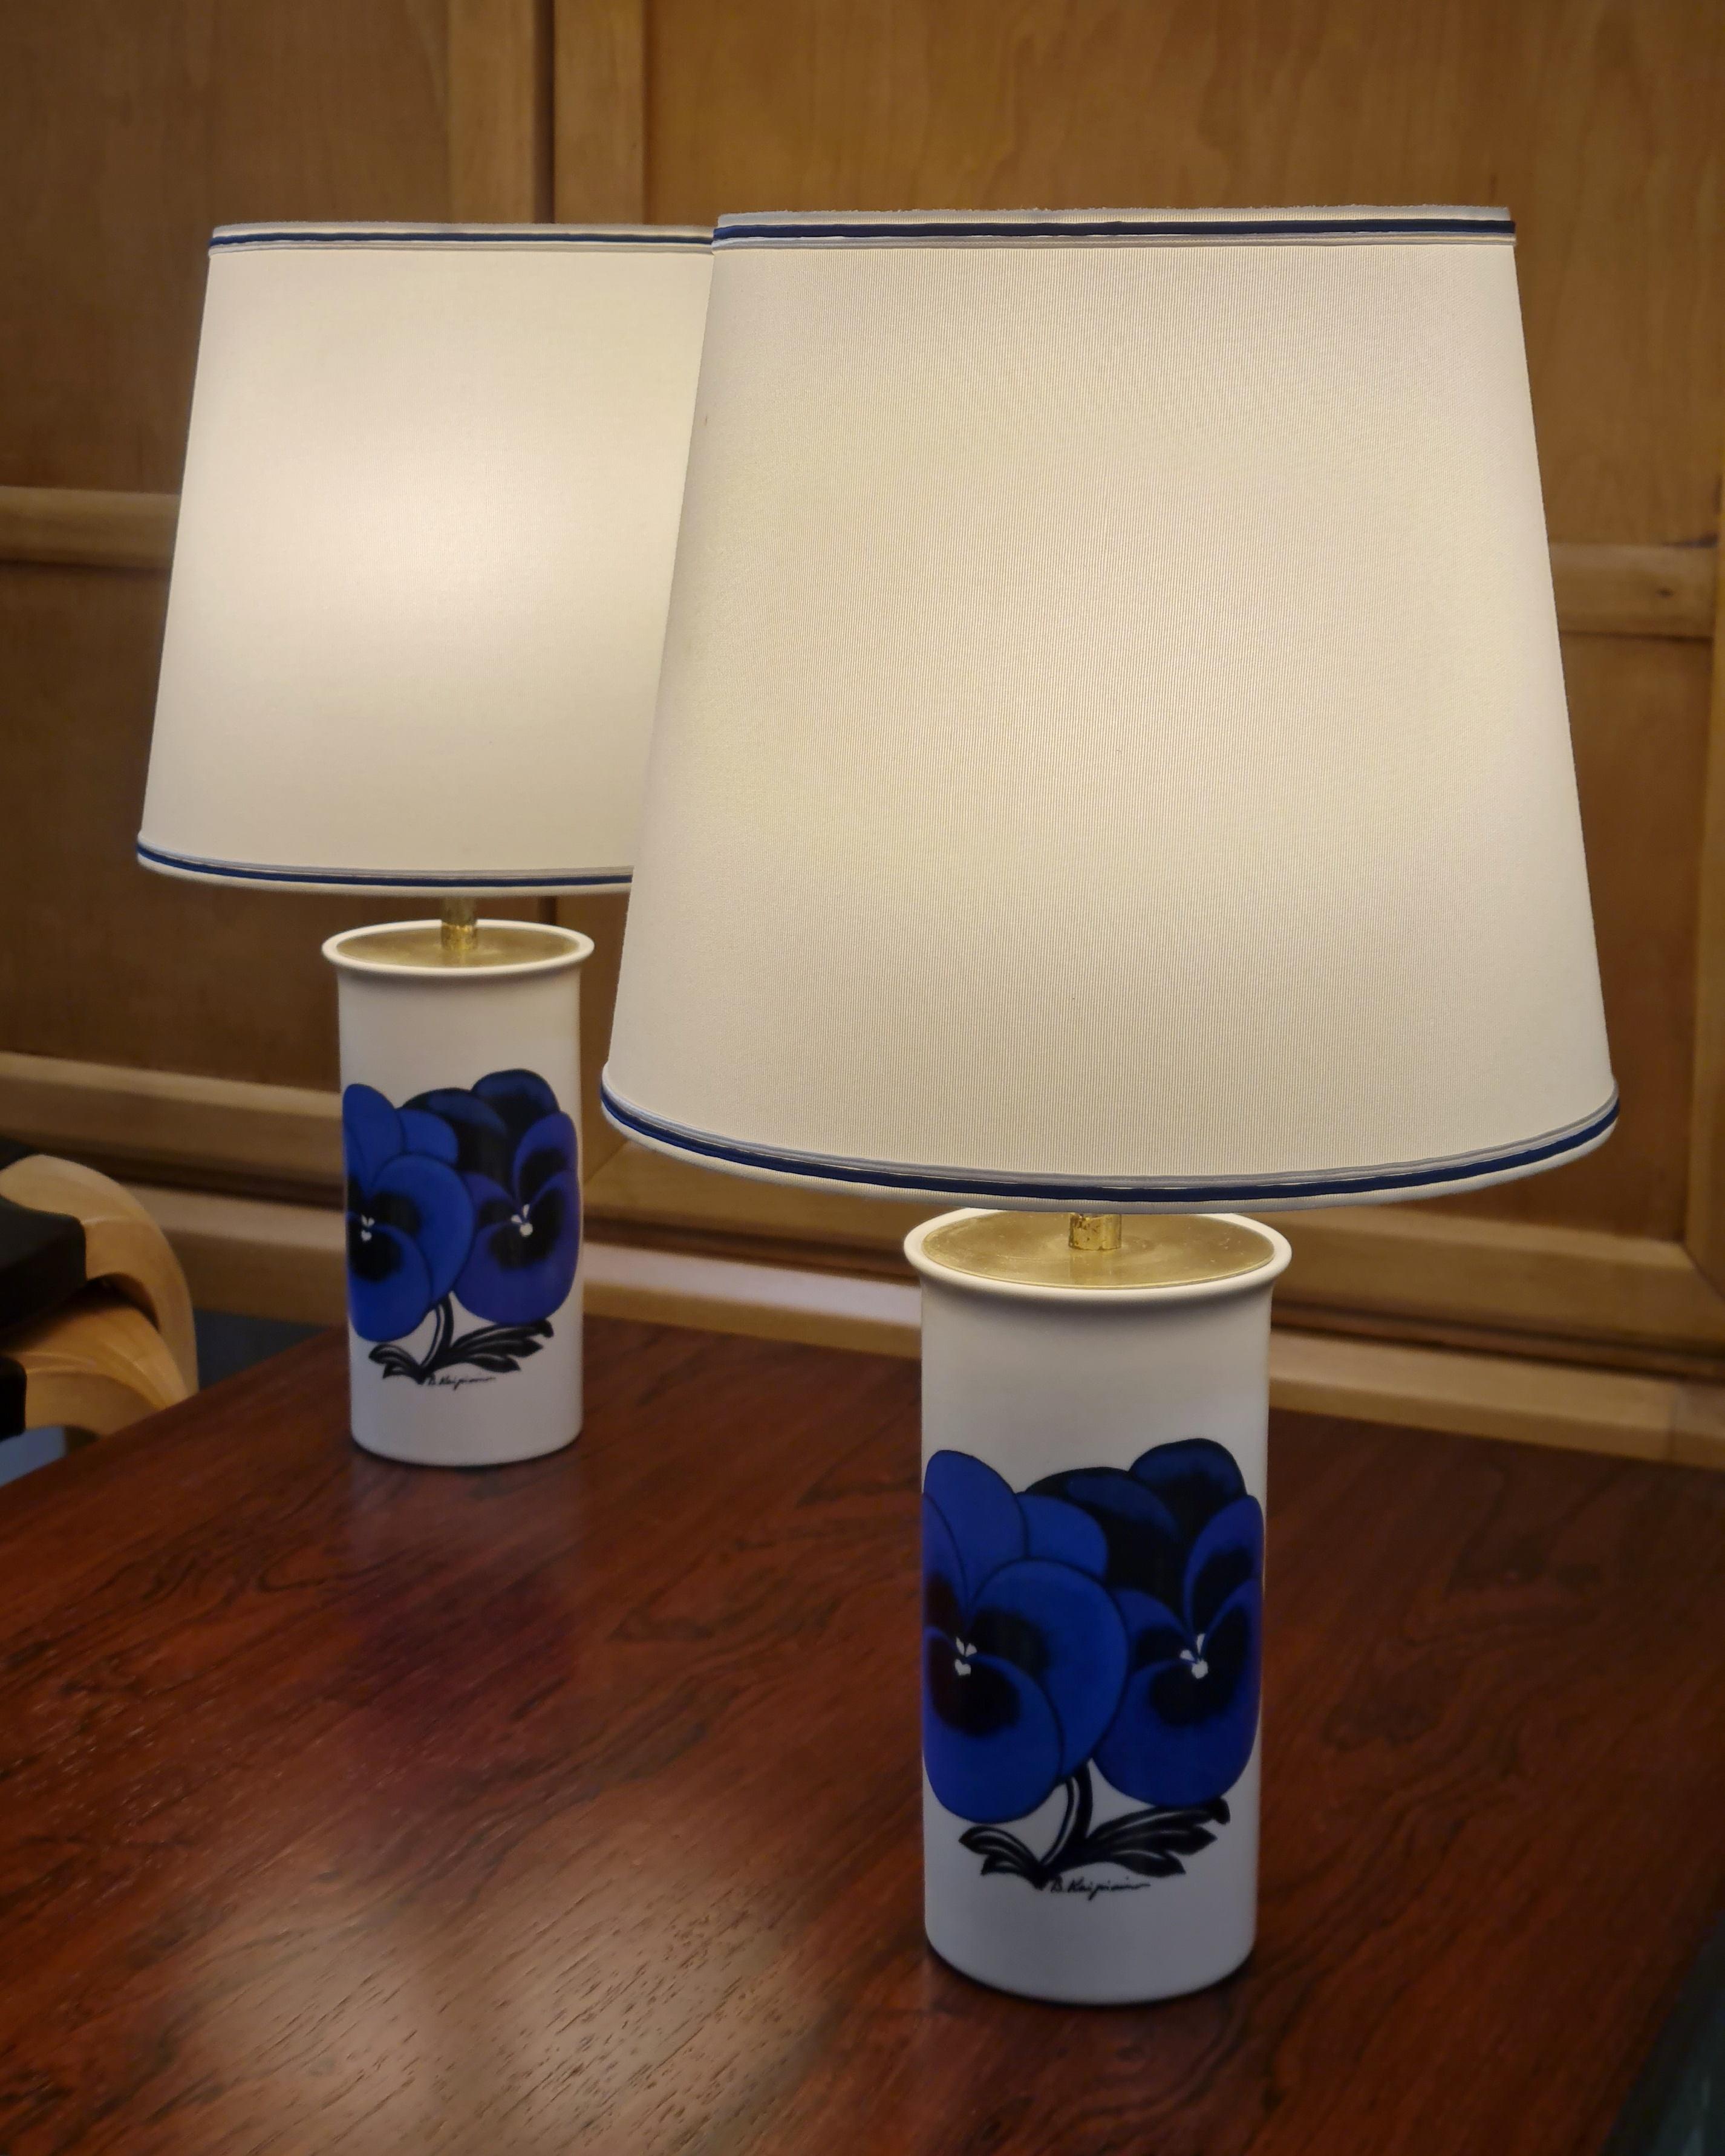 A Pair of Birger Kaipiainen Table Lamps, Arabia 1980s For Sale 3